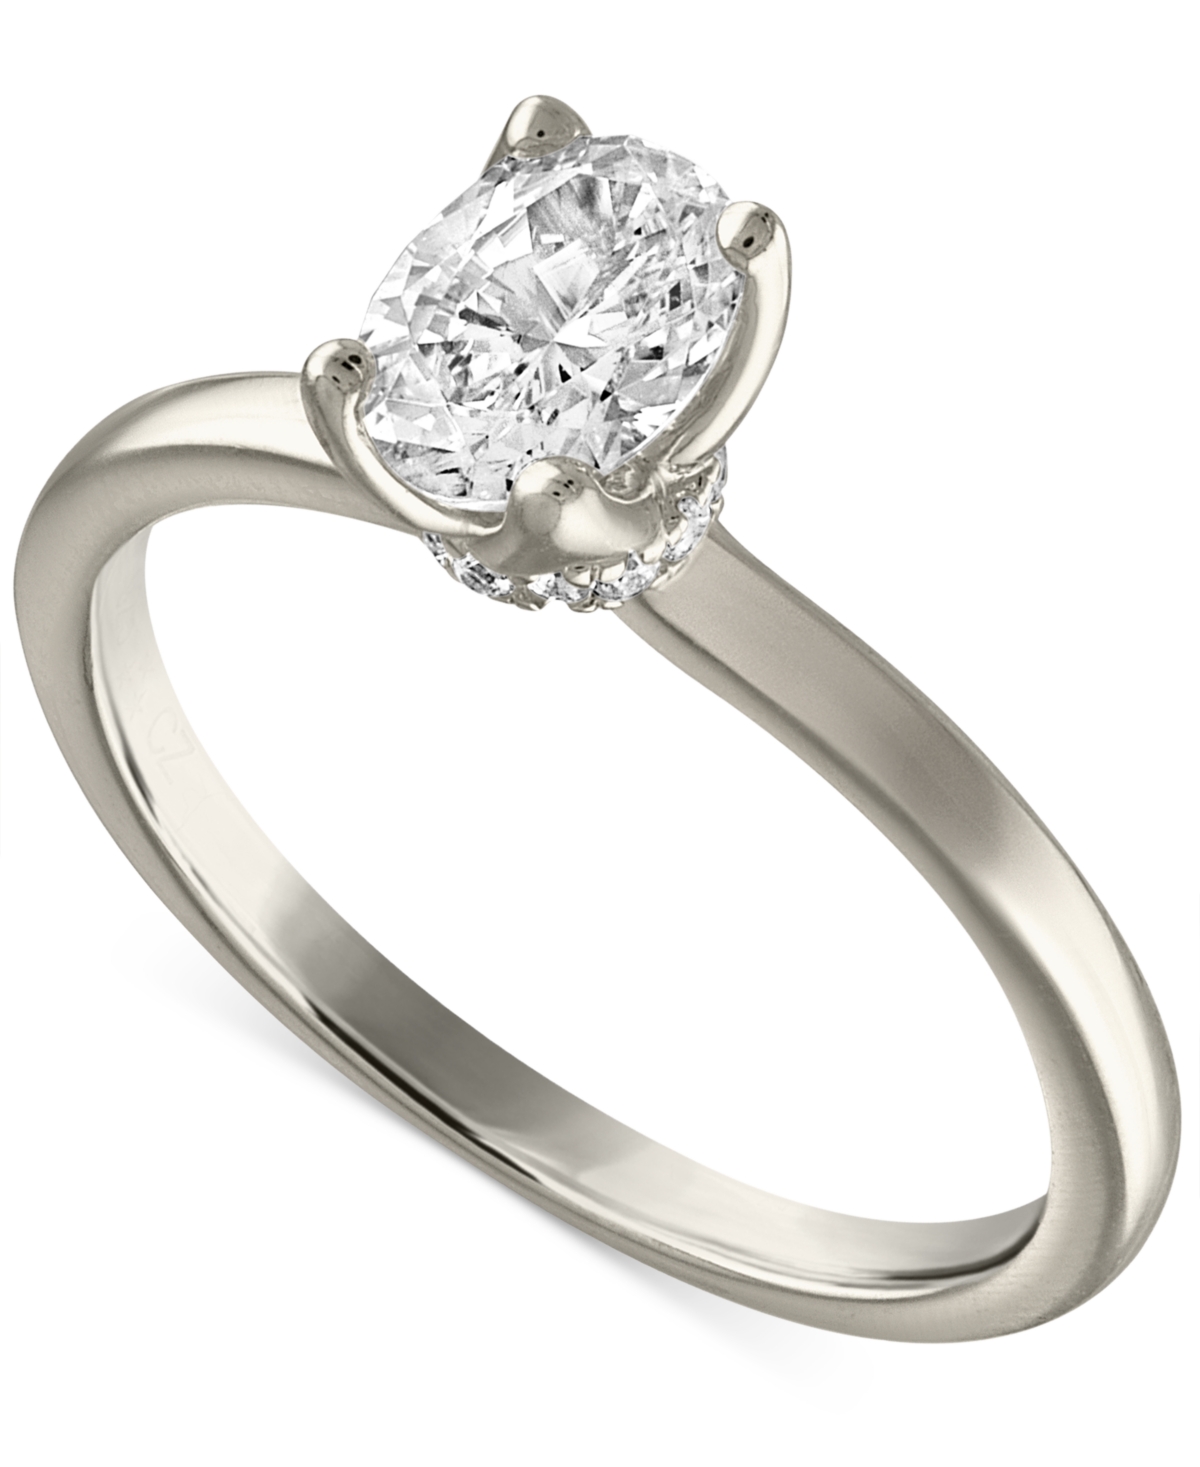 Certified Diamond Oval-Cut Solitaire Engagement Ring (3/4 ct. t.w.) in 14k White Gold Featuring Diamonds ith the De Beers Code of Origin, Crea